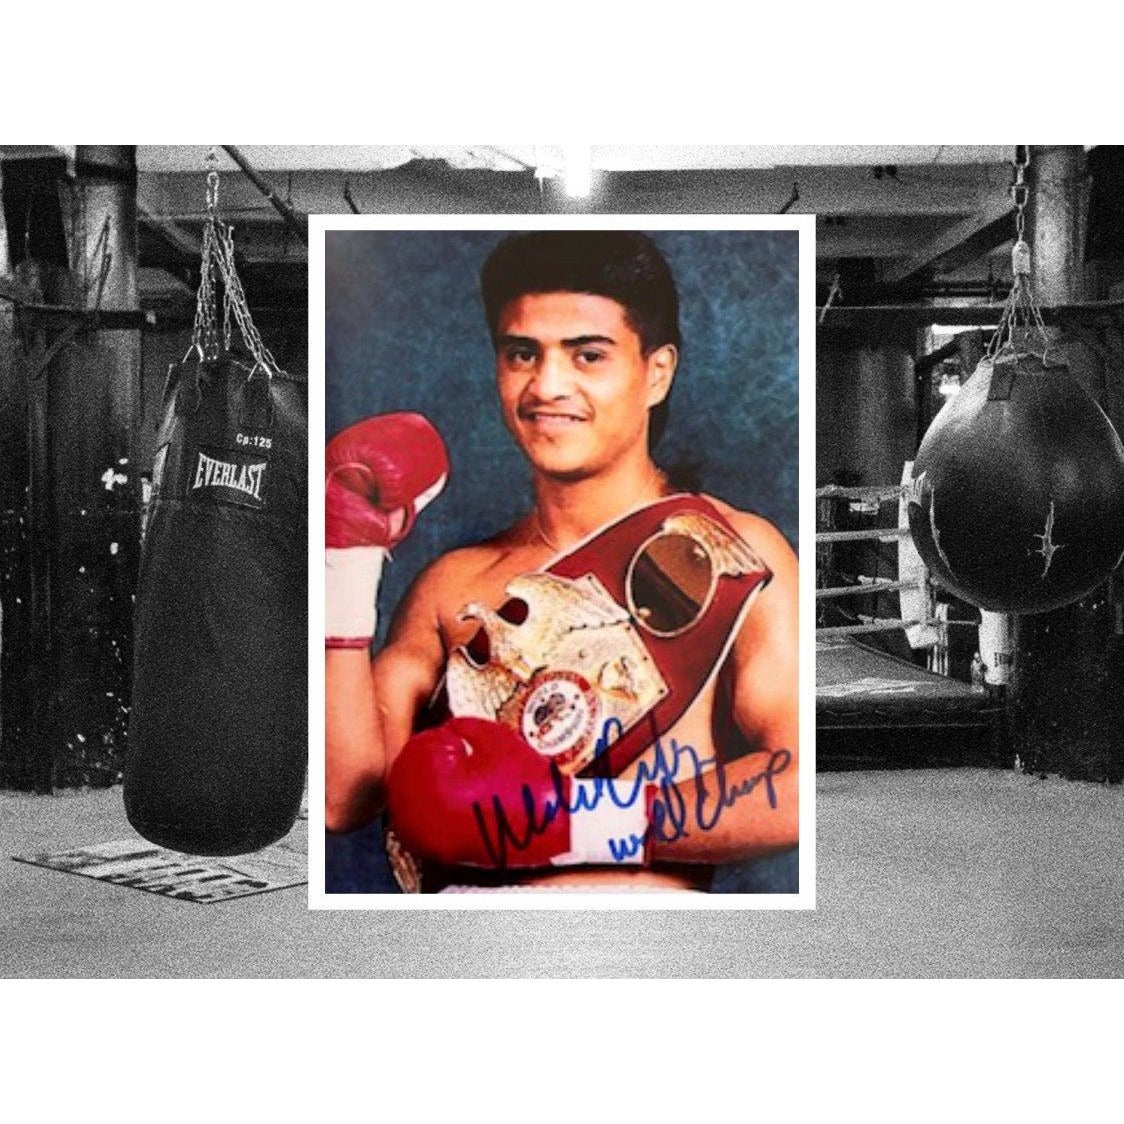 Michael Carbajal boxing great 5 x 7 photo signed